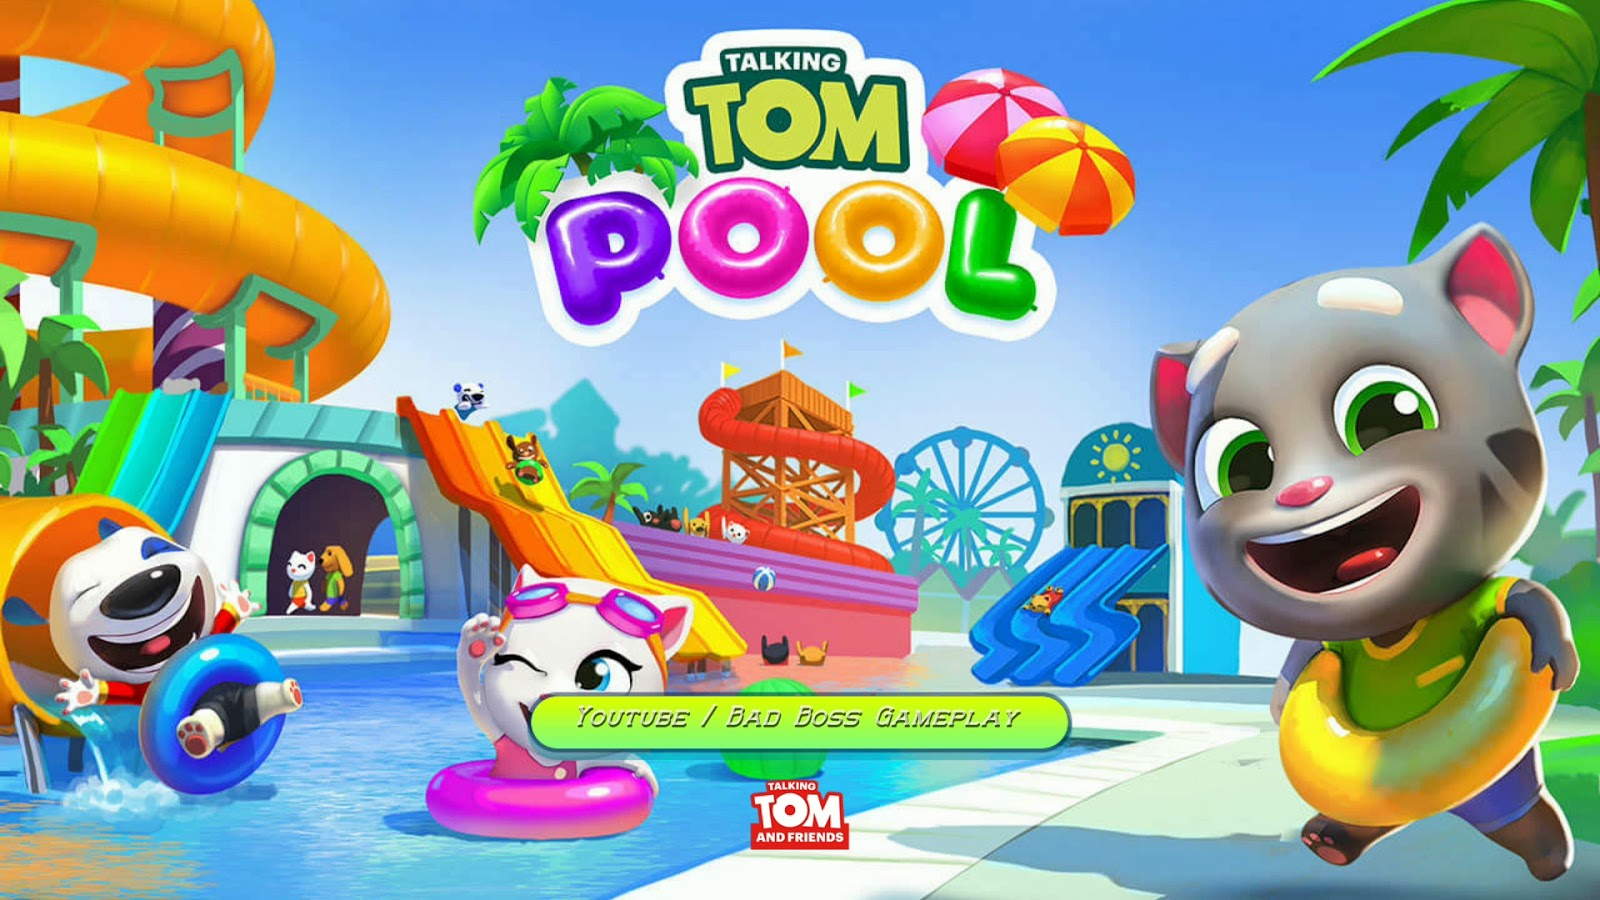 Talking Tom Pool Download For Android Ios Badbossgameplay